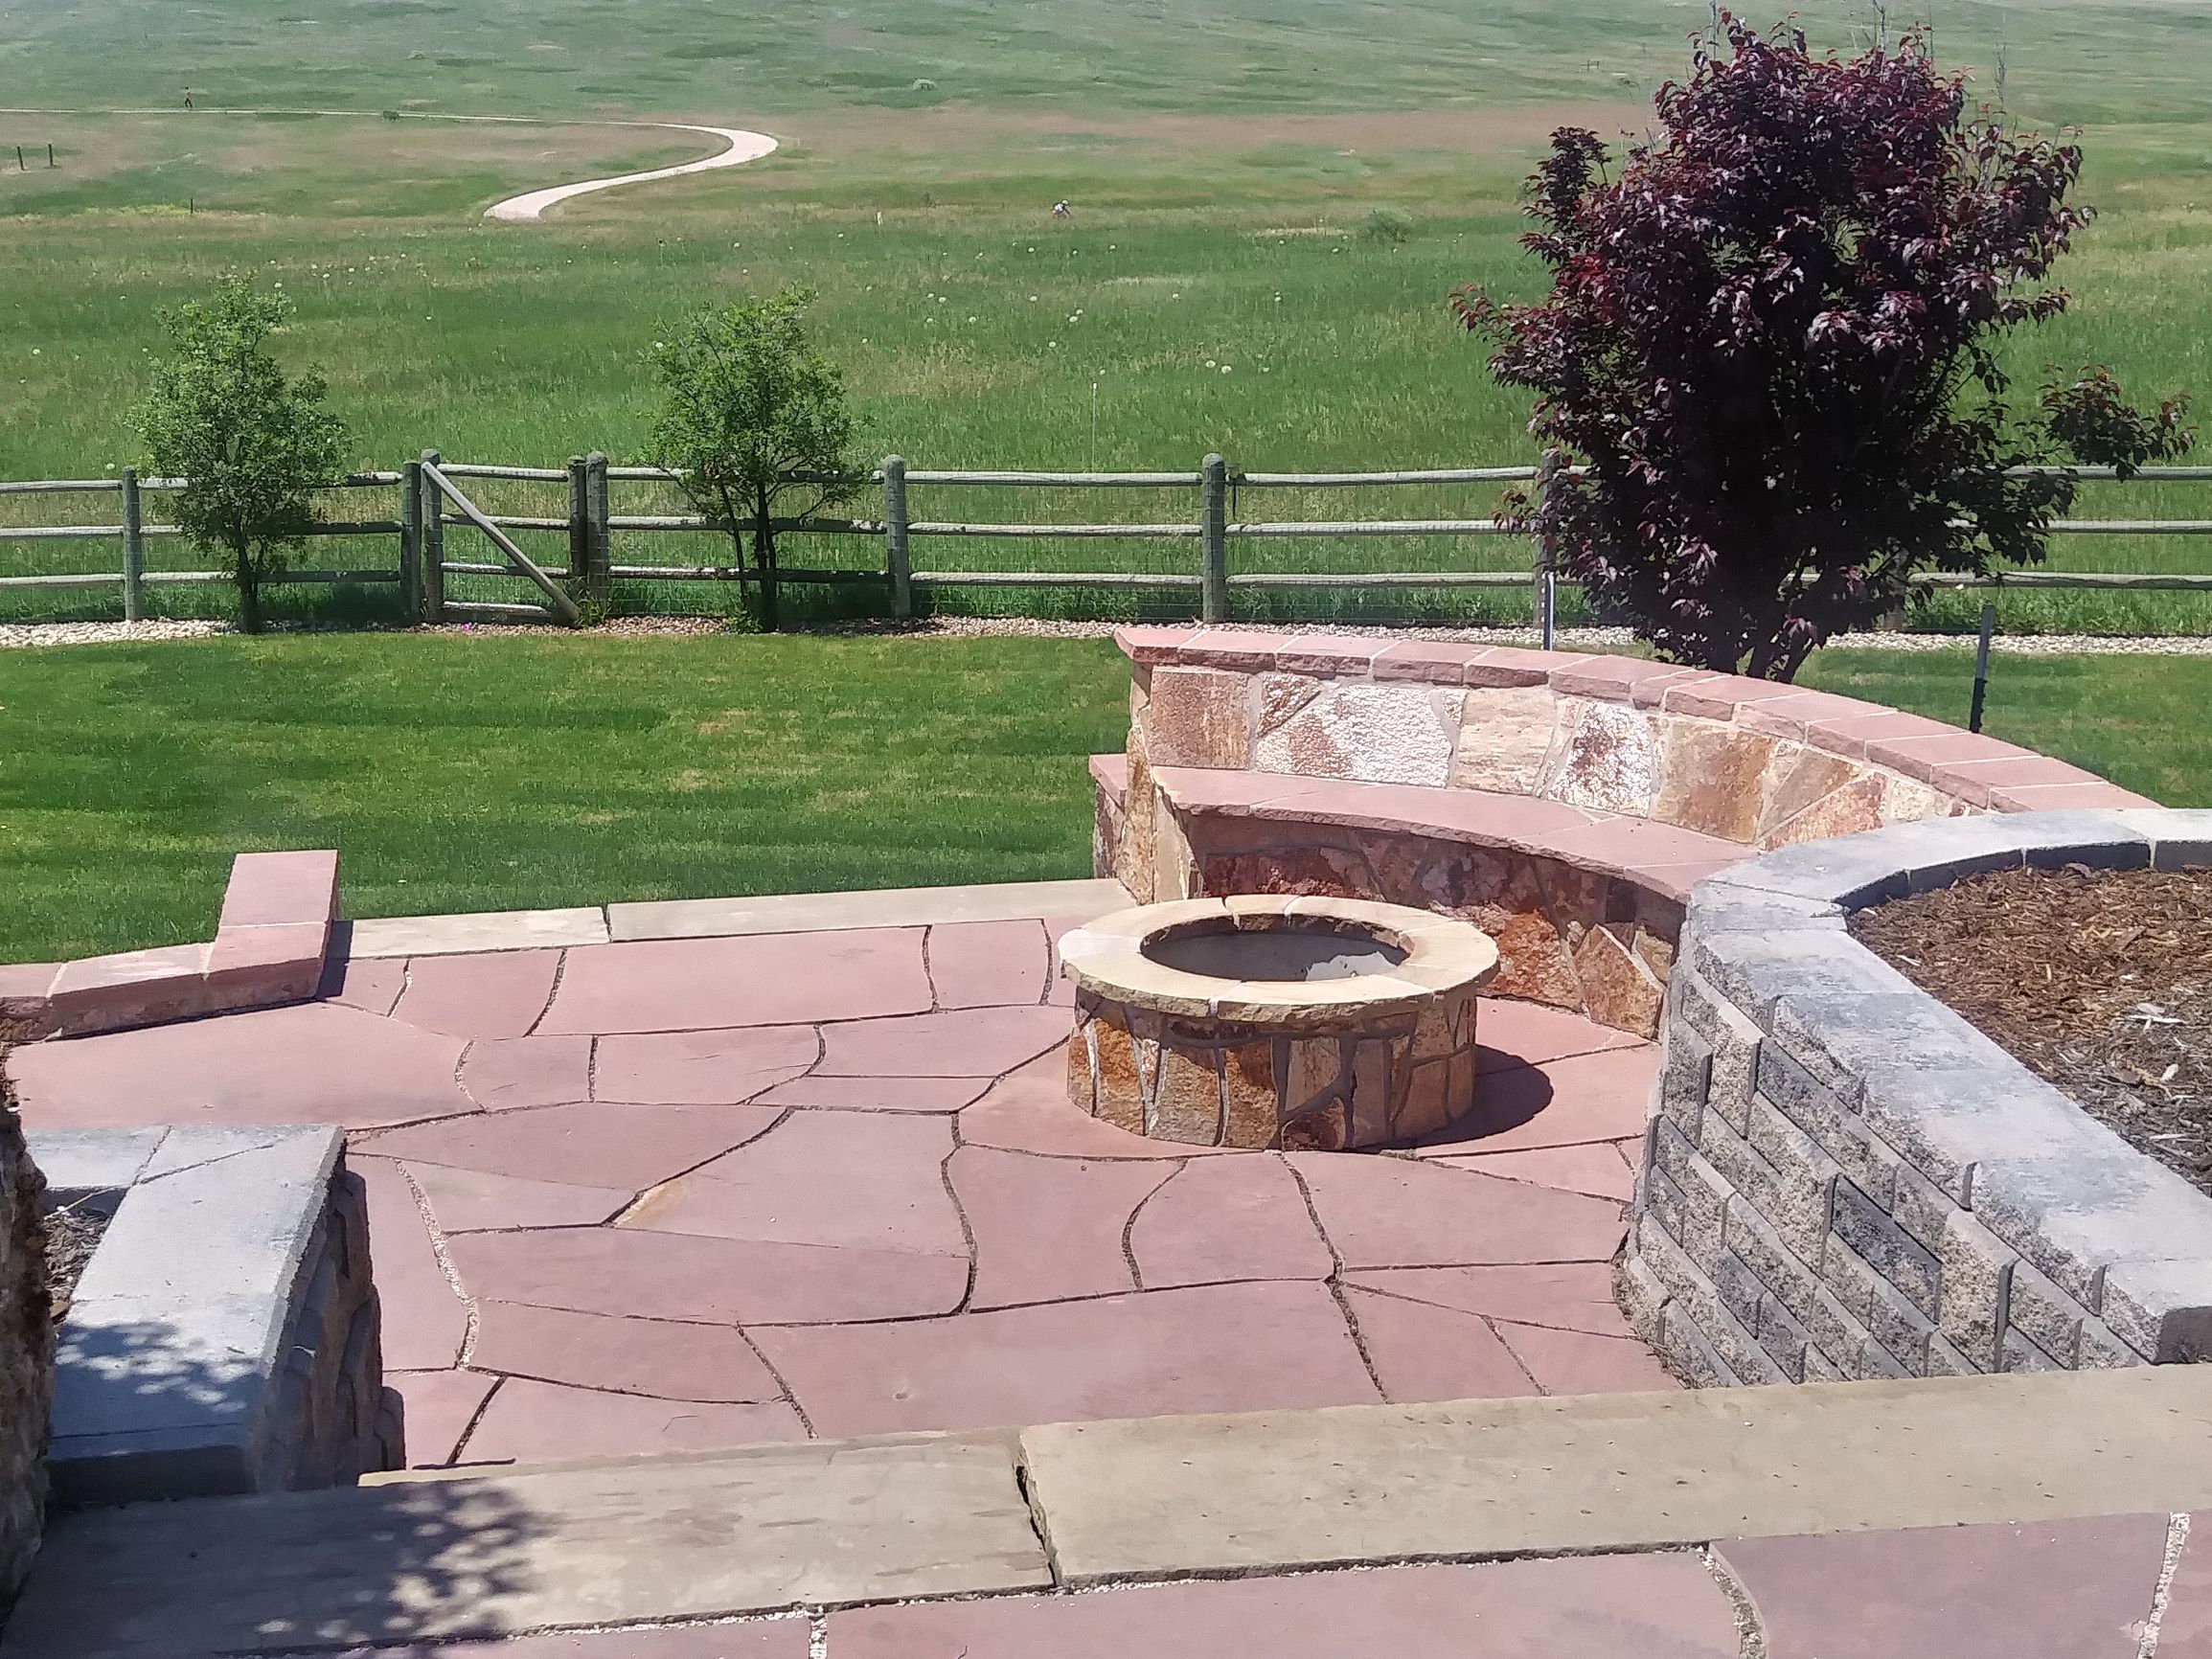 Flat stone patio with Fire pit, and flat stone bench seating surrounding fire pit.